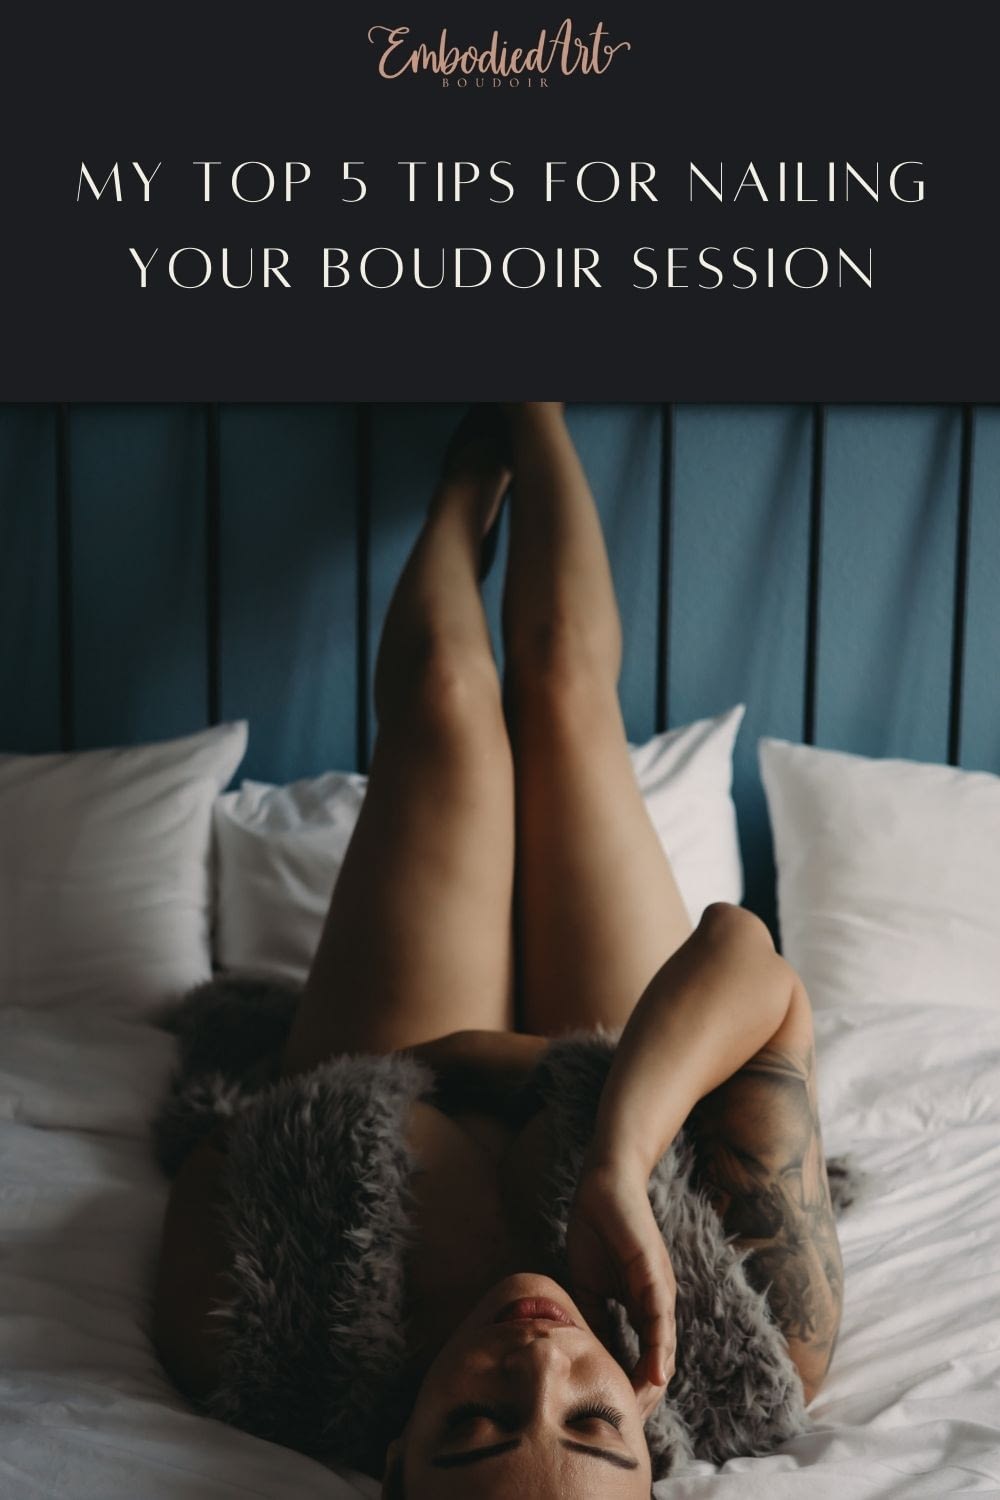 Blog Post: My Top 5 Tips for Nailing Your Boudoir Session. Woman lying on bed and stroking her face, wearing heels with a furry vest, nothing else. Photo by Embodied Art Boudoir, Colorado boudoir photography, boudoir photo session, boudoir photoshoot, lingerie, happy women, confident women, art photography, body as art, boudoir, portrait, boudoir poses, empowerment through photography, natural hairstyles, empowering photography, professional hair and makeup, self love photoshoot, body positive, self care, luxury photoshoot, confidence, first boudoir photoshoot, boudoir session, prep guide, hydrate